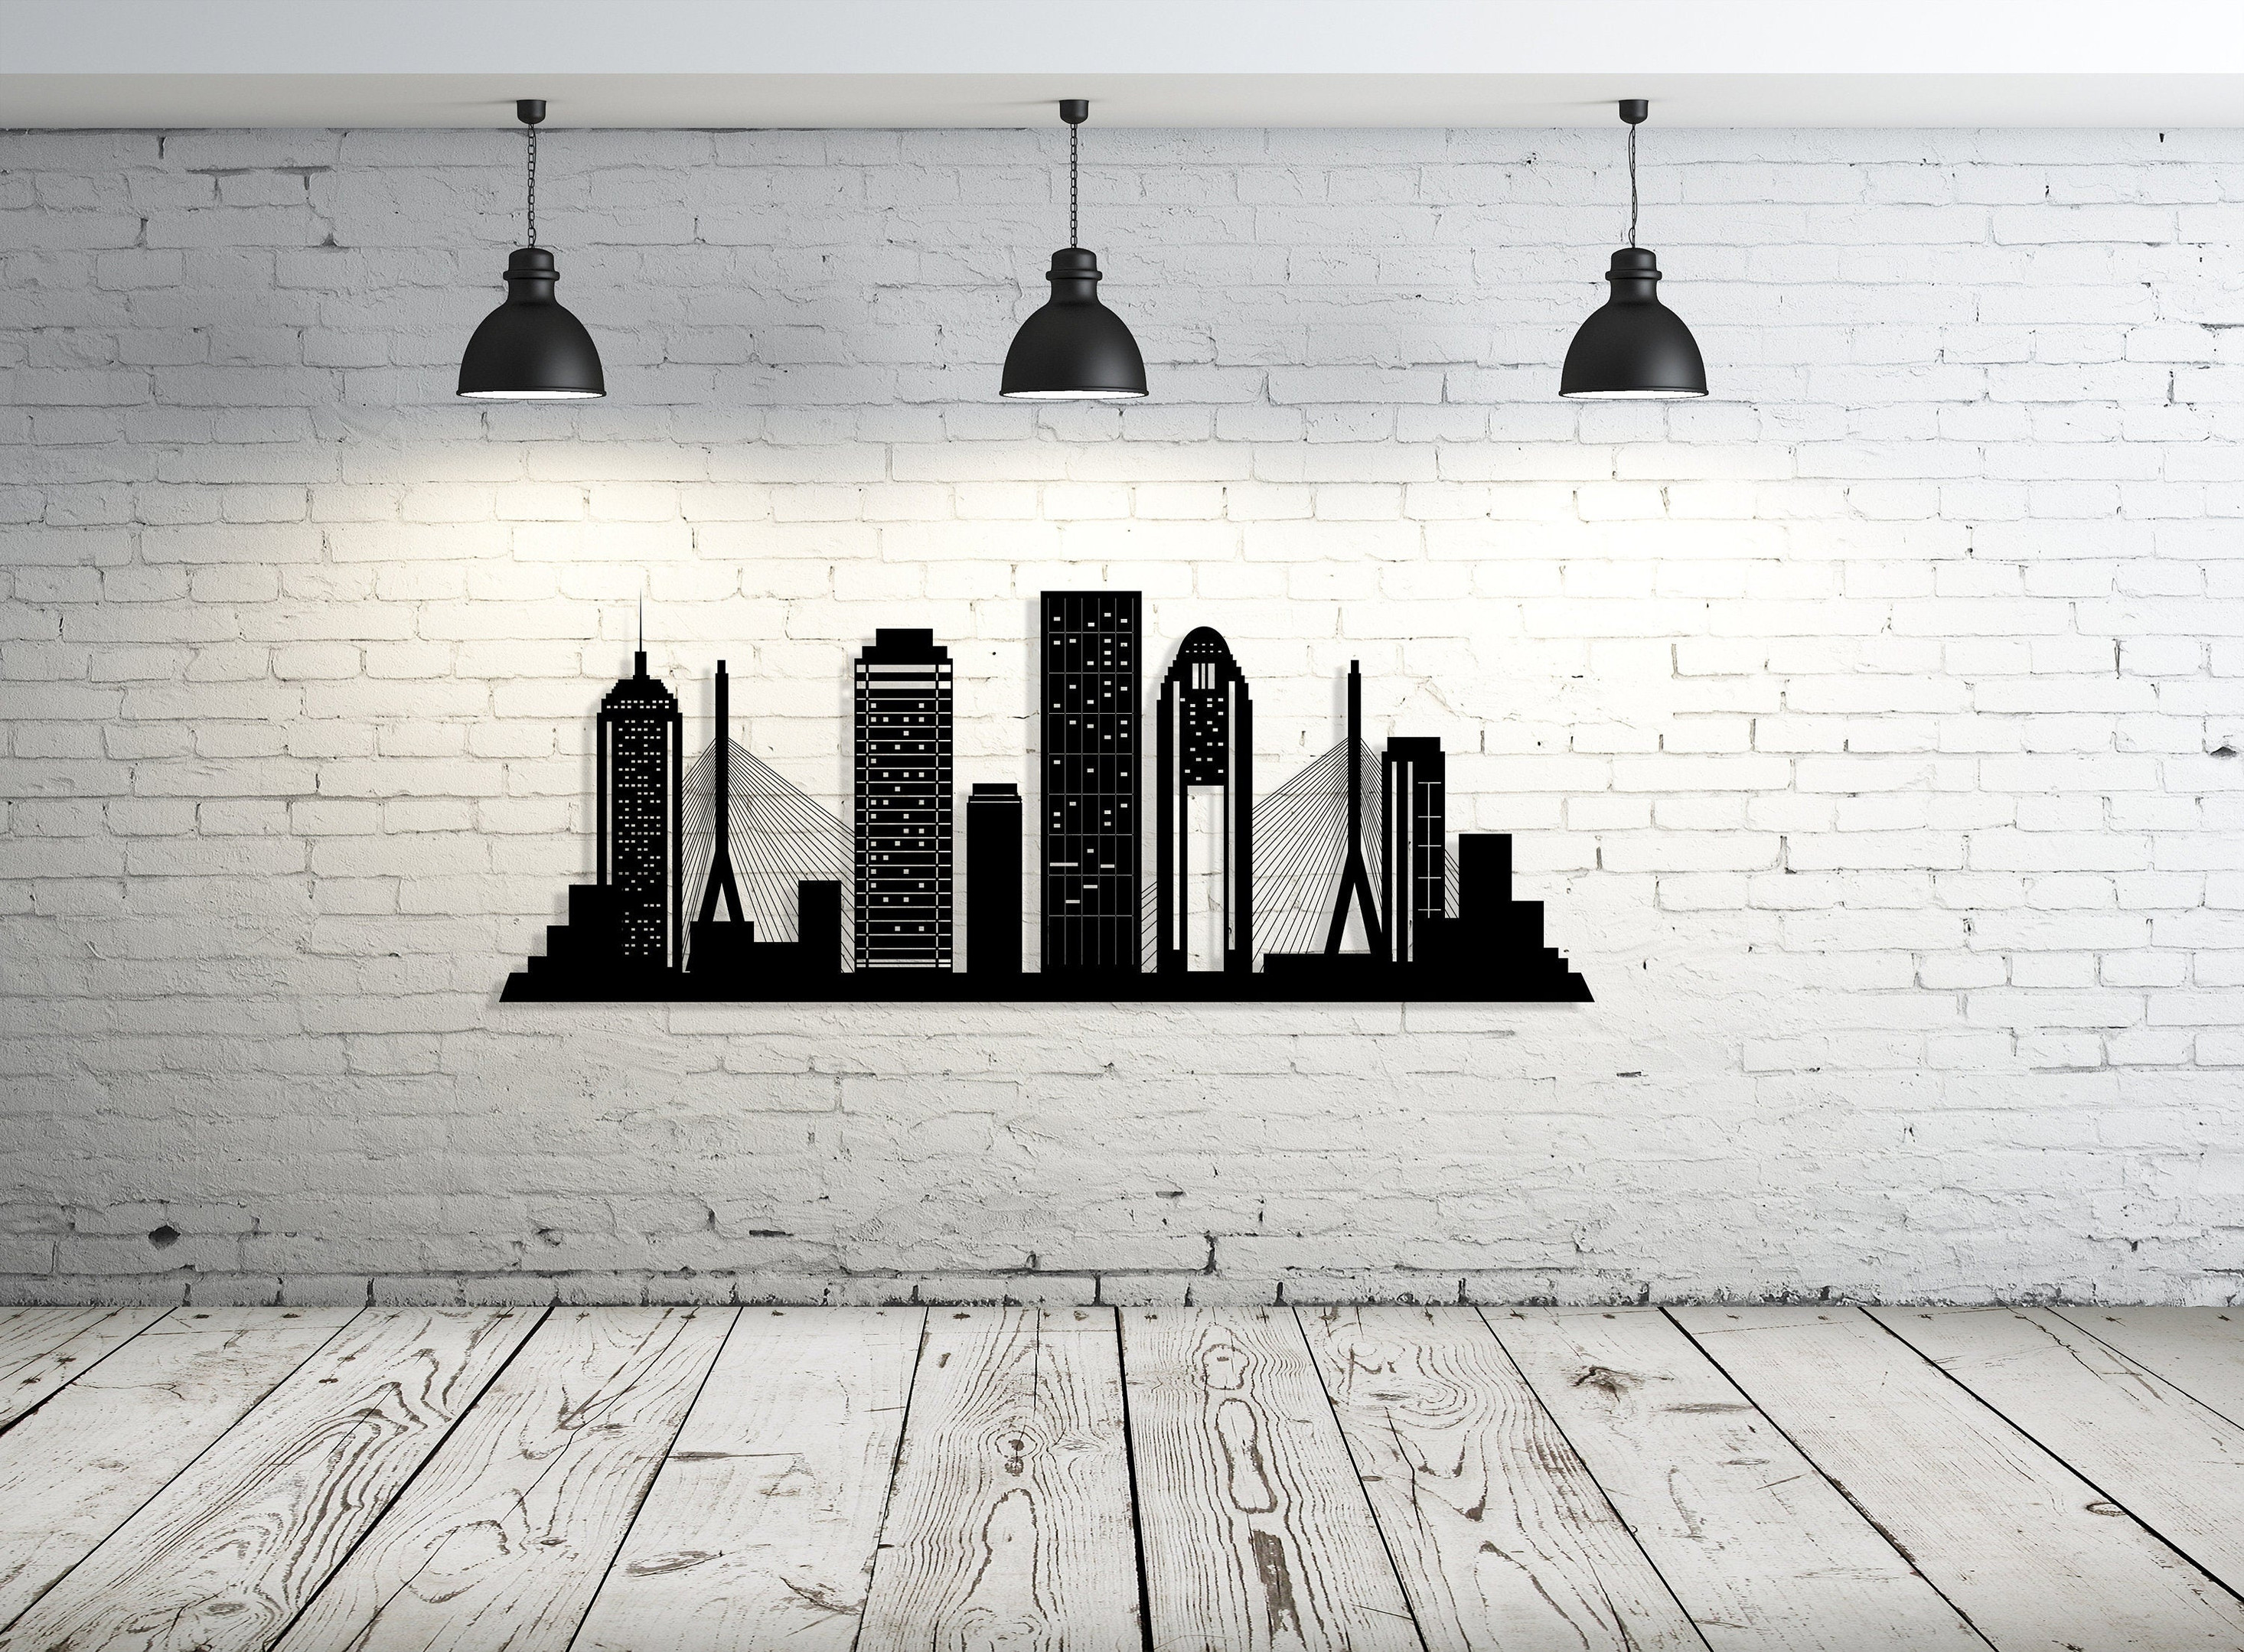 Boston City Silhouette Metal Wall Art, Metal Wall Decor, Housewarming Gift, Home Office Living Room Decoration, Wall Hangings,, Metal Laser Cut Metal Signs Custom Gift Ideas 24x24IN